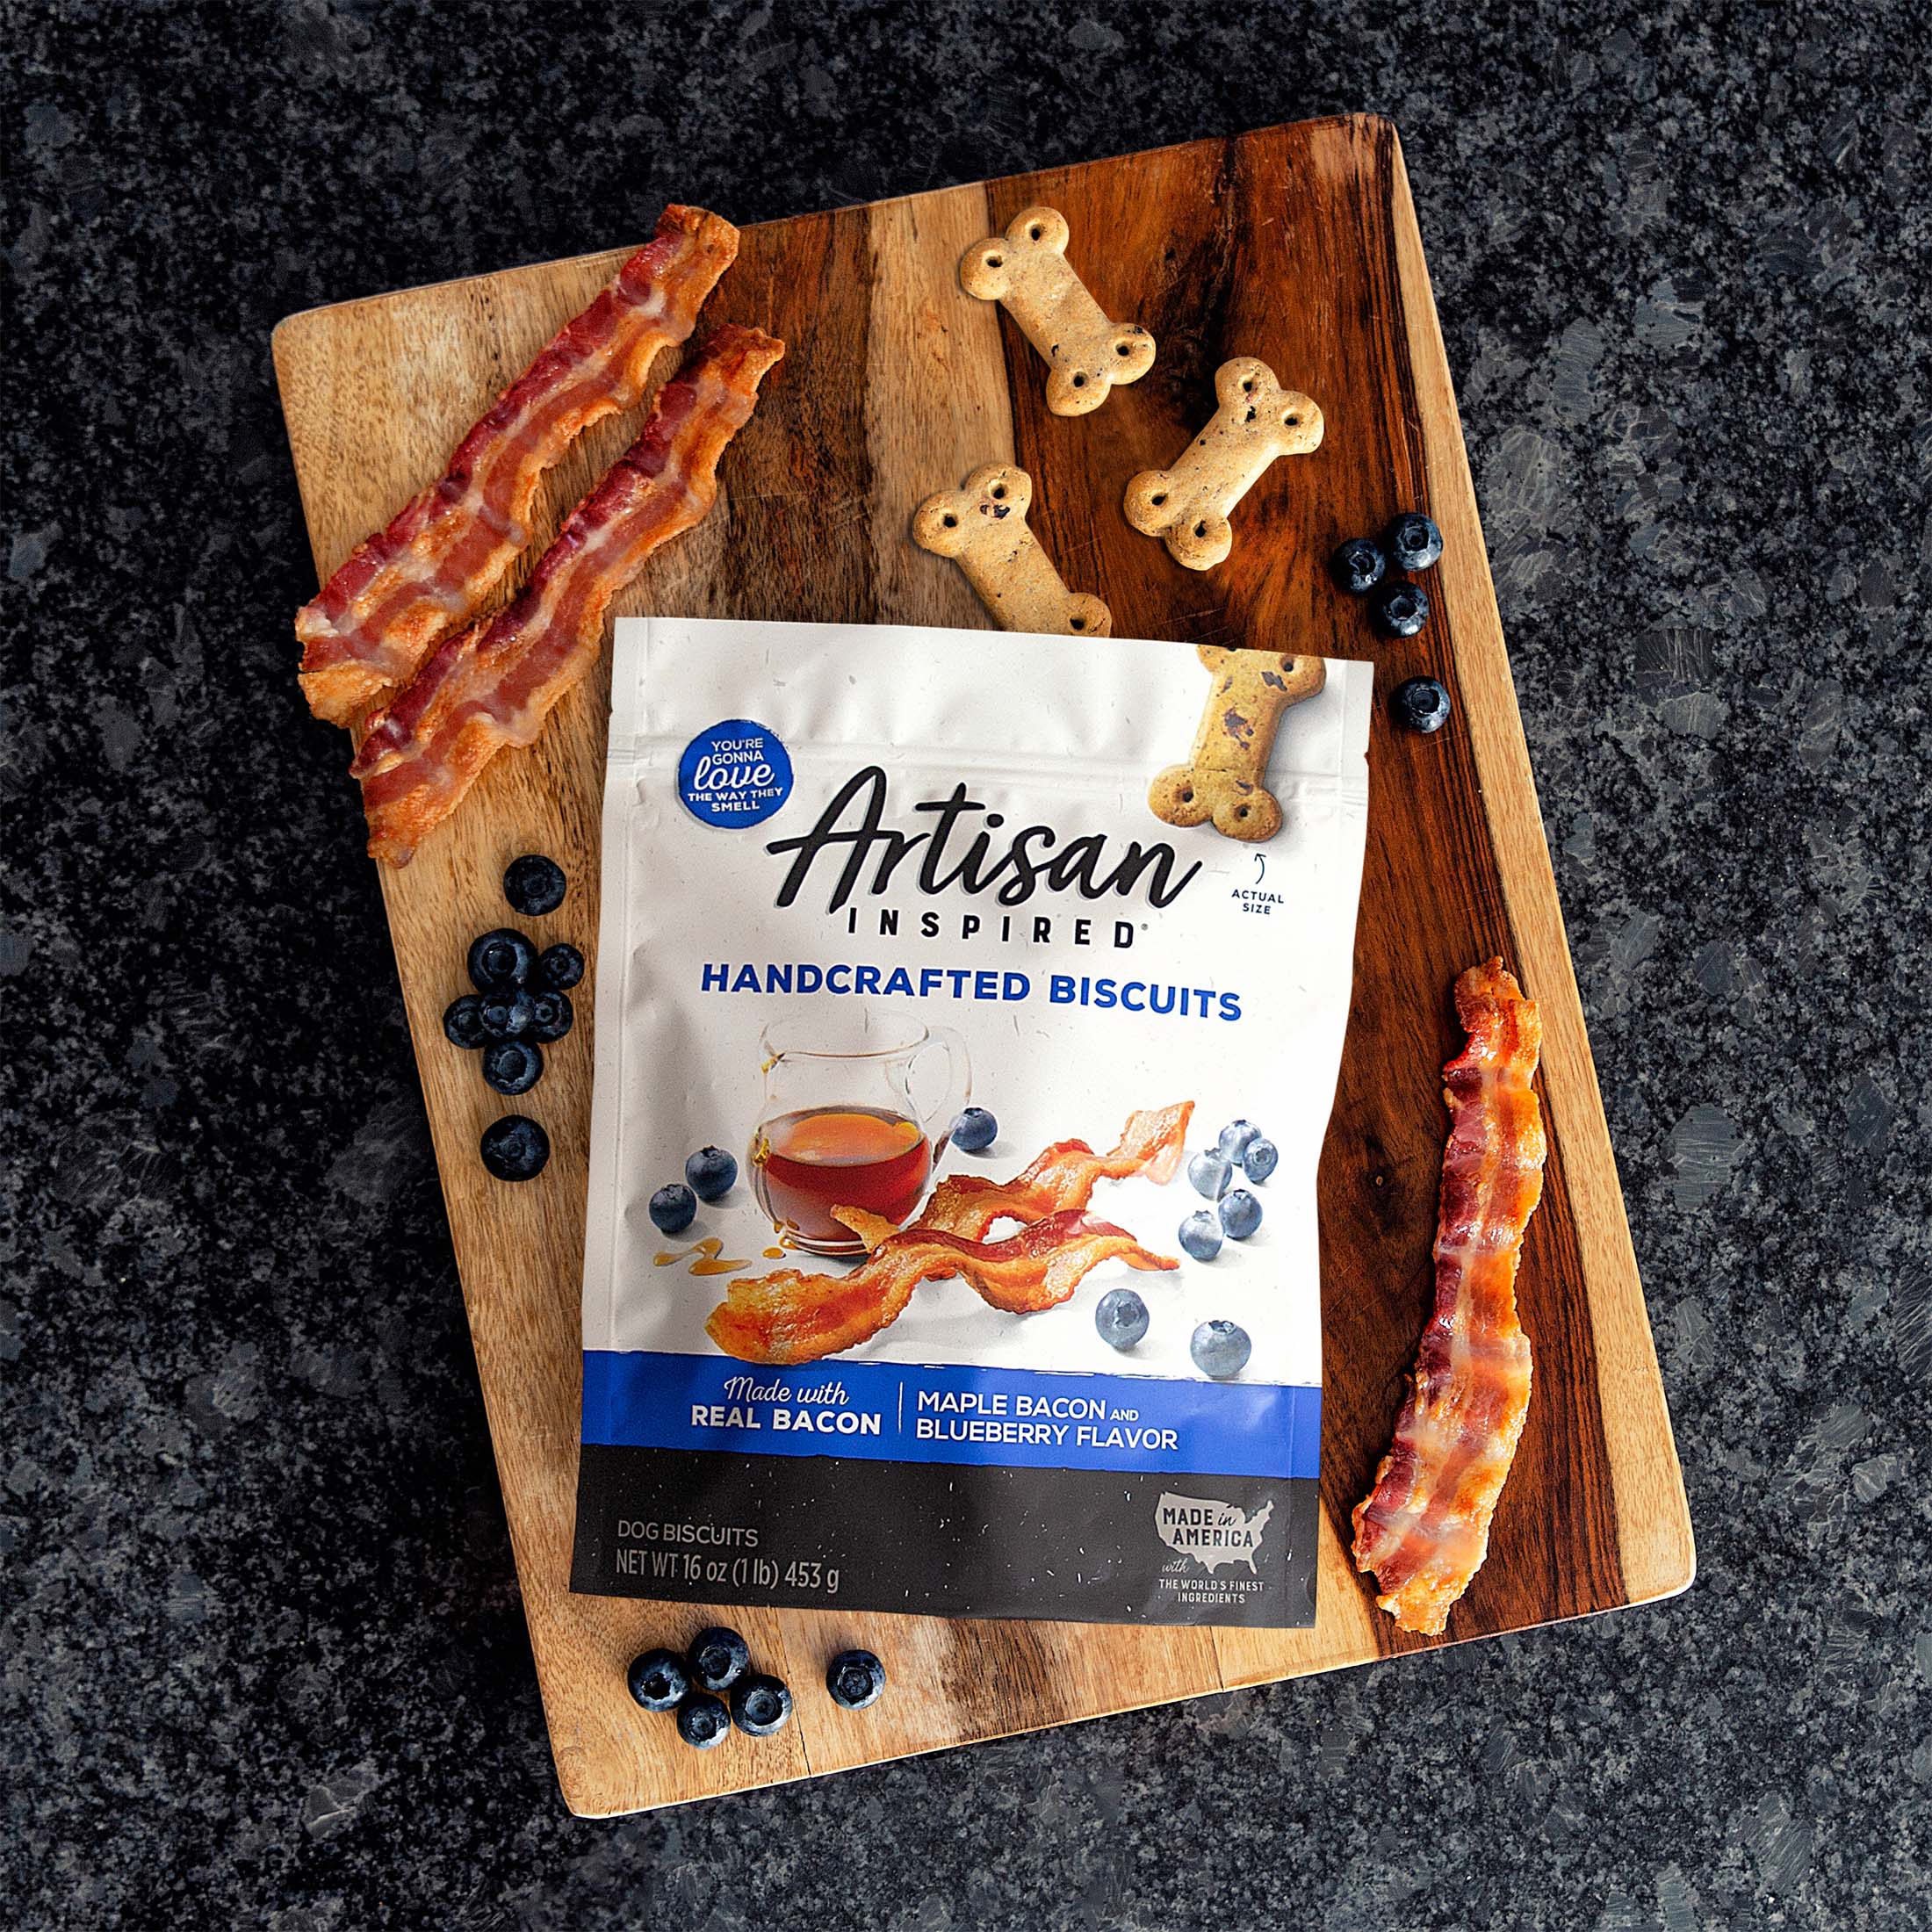 Artisan Inspired Maple Bacon & Blueberry Flavor Biscuits Dog Treats, 16oz bag - image 3 of 9